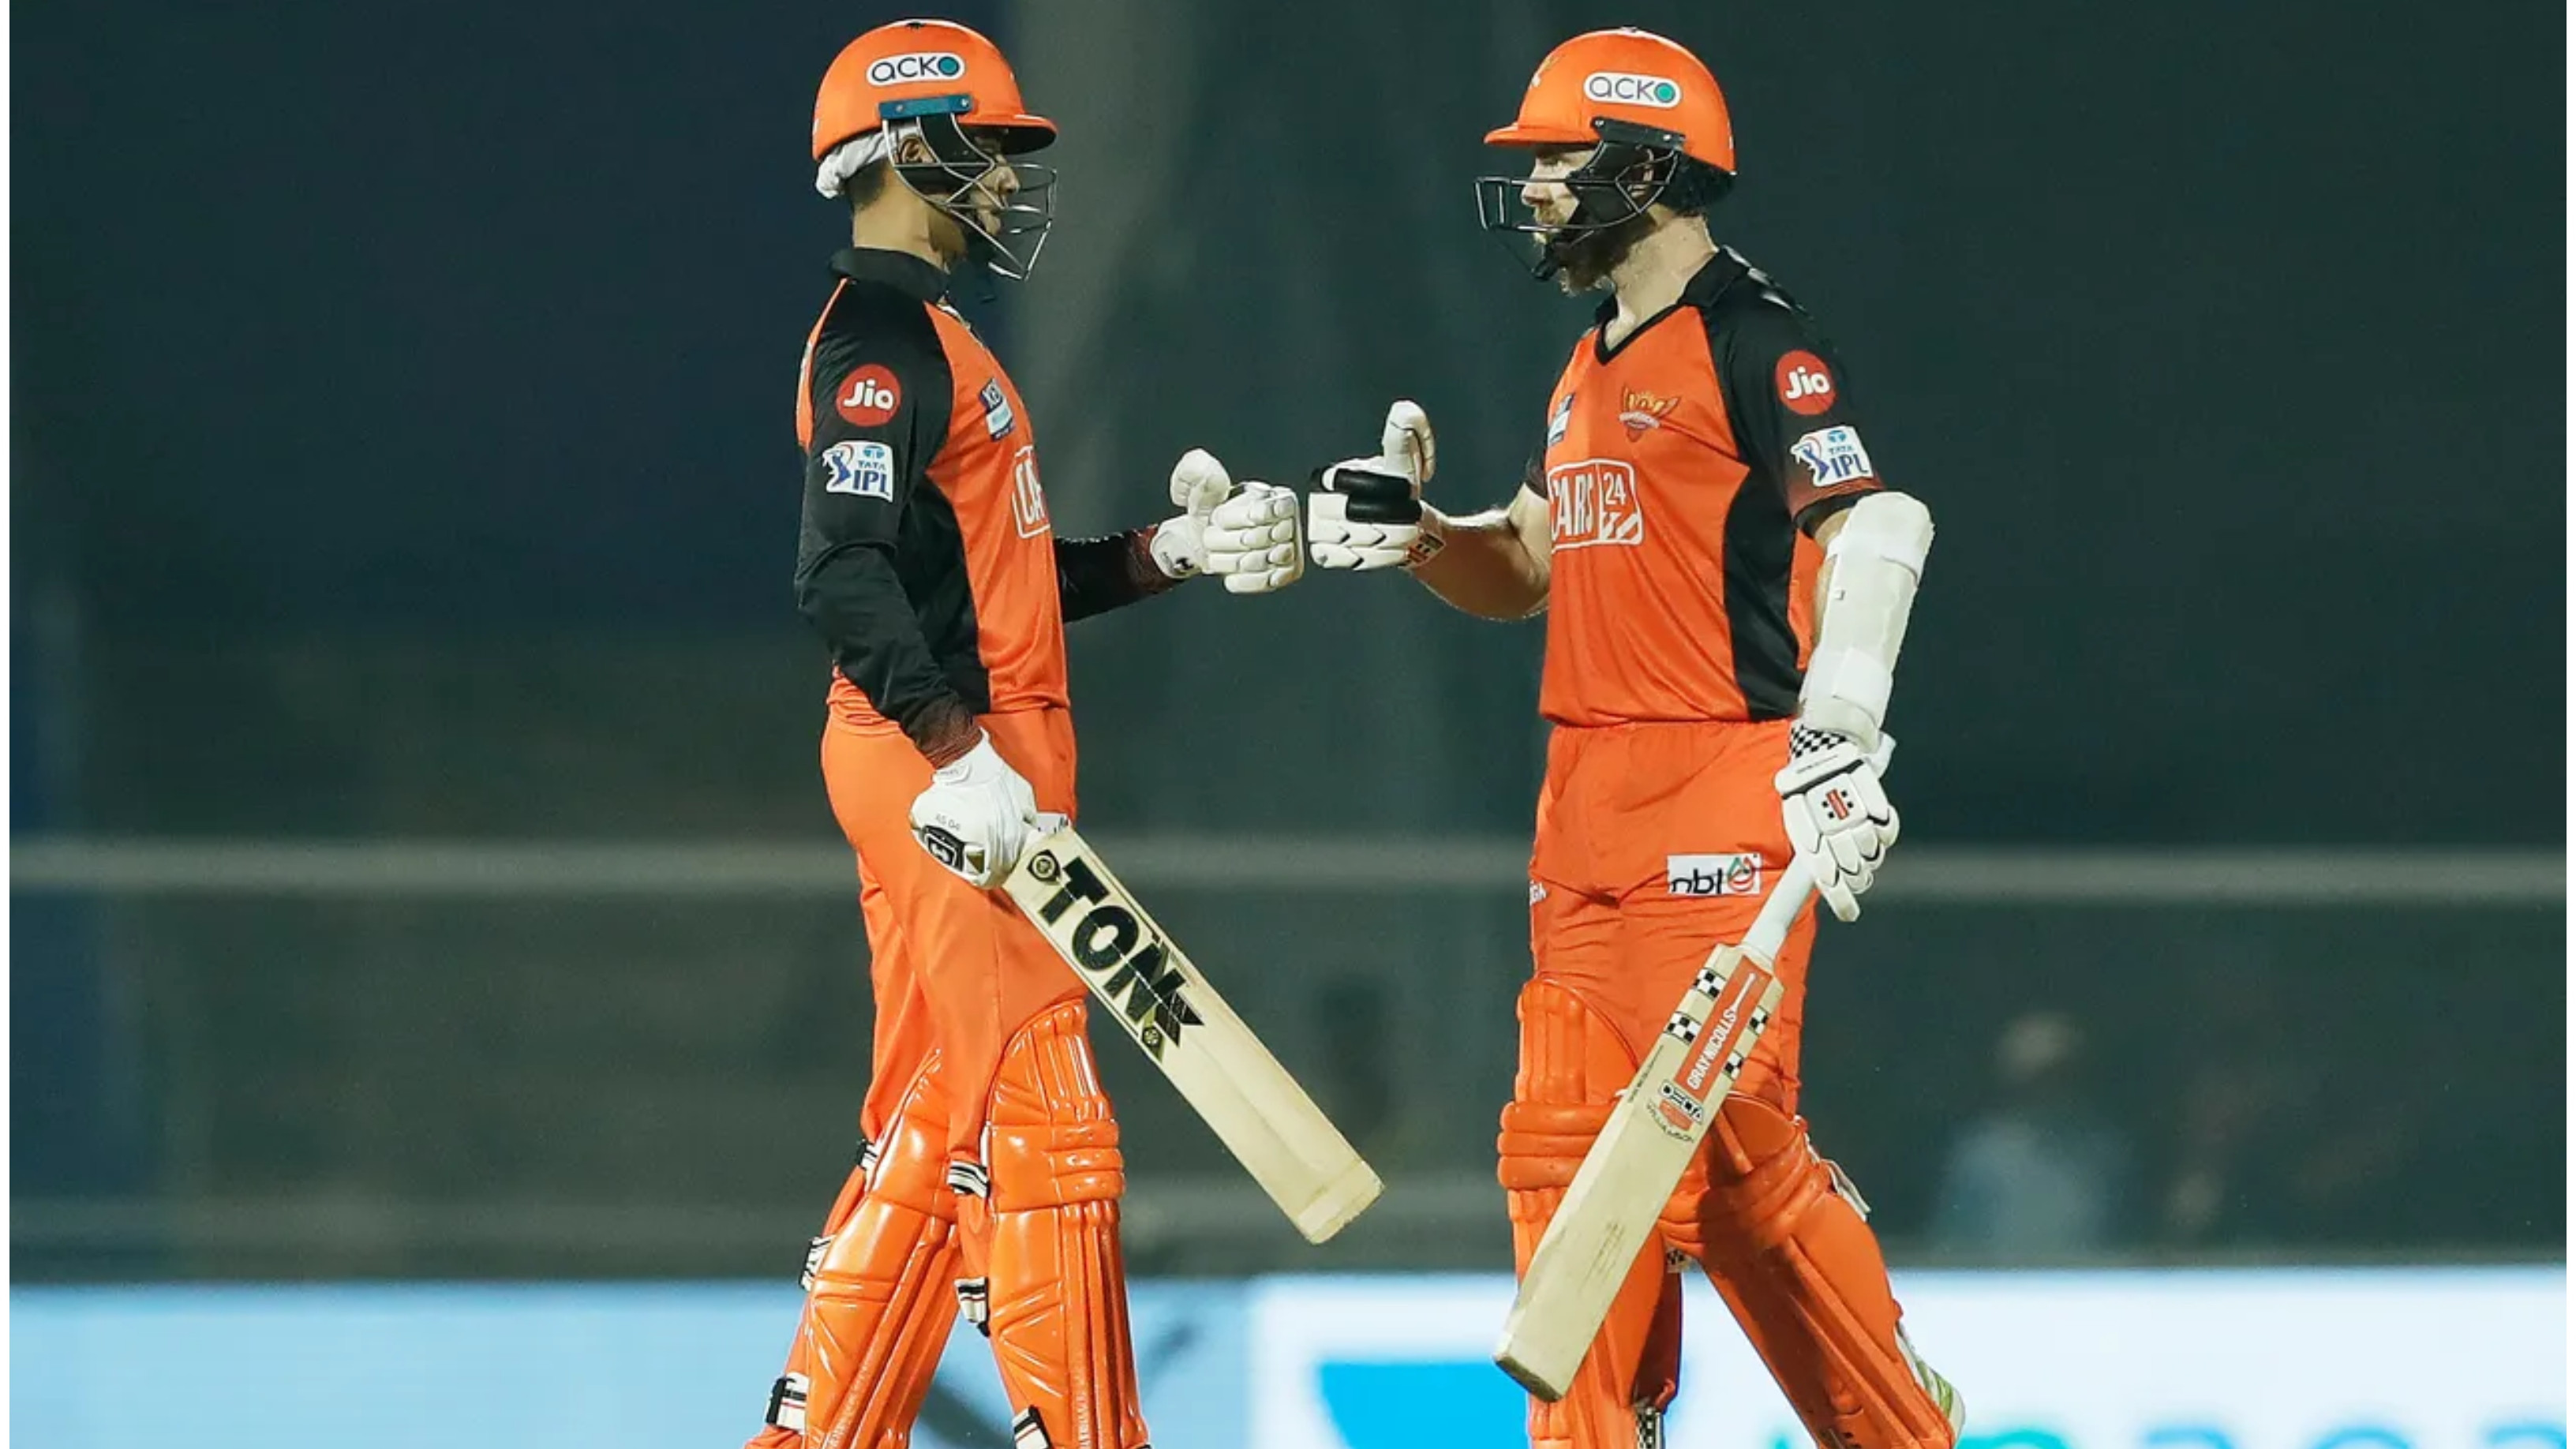 IPL 2022: “We've been talking almost on every ball”, Abhishek Sharma shares opening experience with Williamson